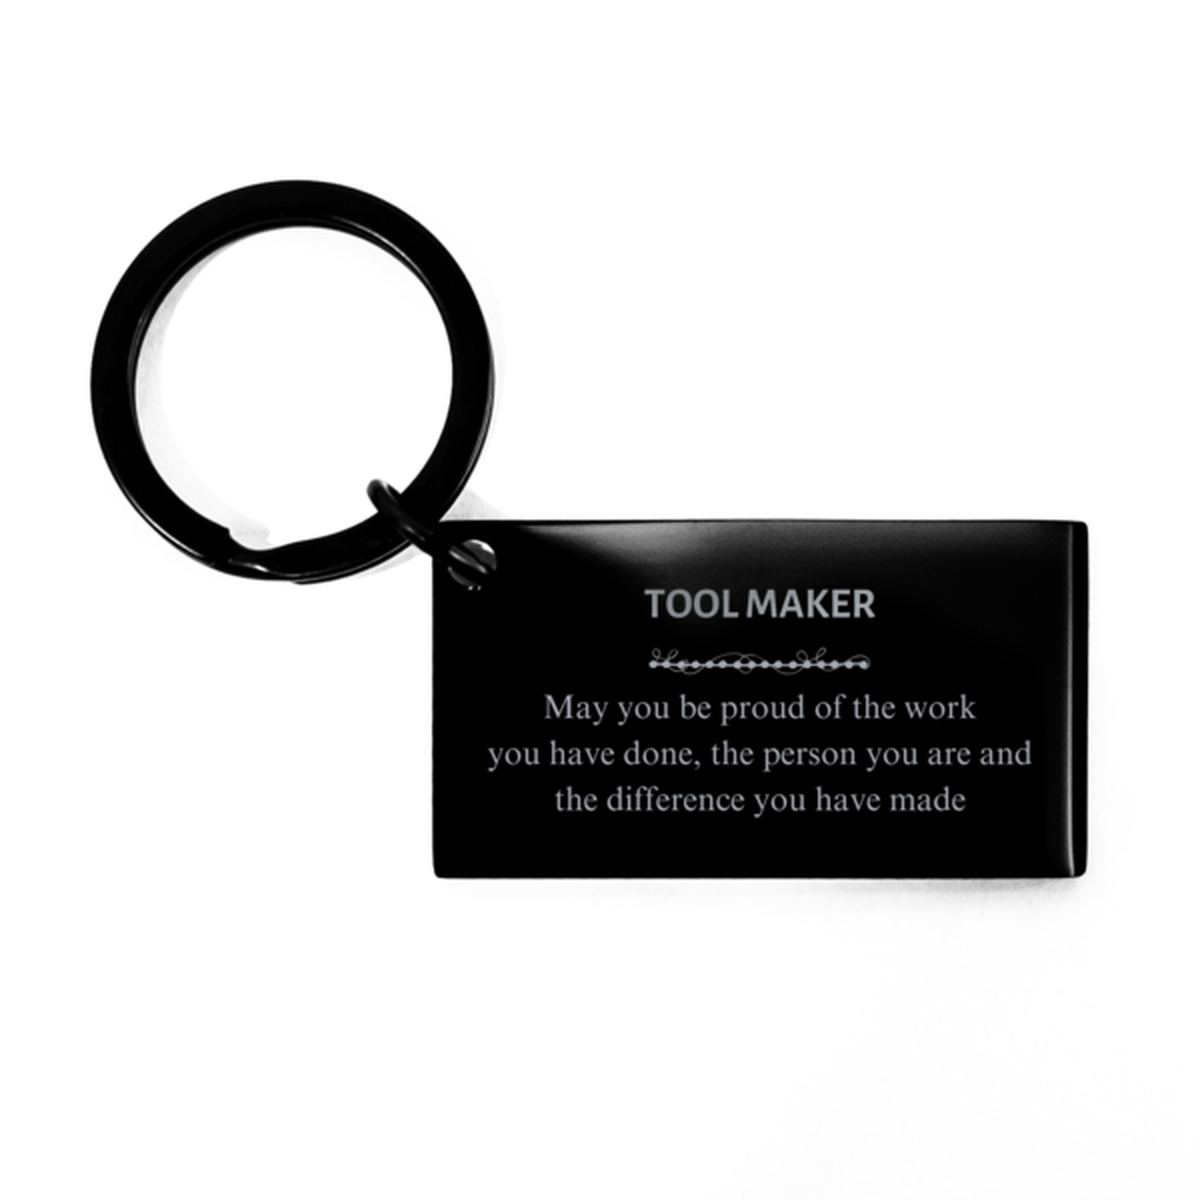 Zookeeper May you be proud of the work you have done, Retirement Tool Maker Keychain for Colleague Appreciation Gifts Amazing for Tool Maker